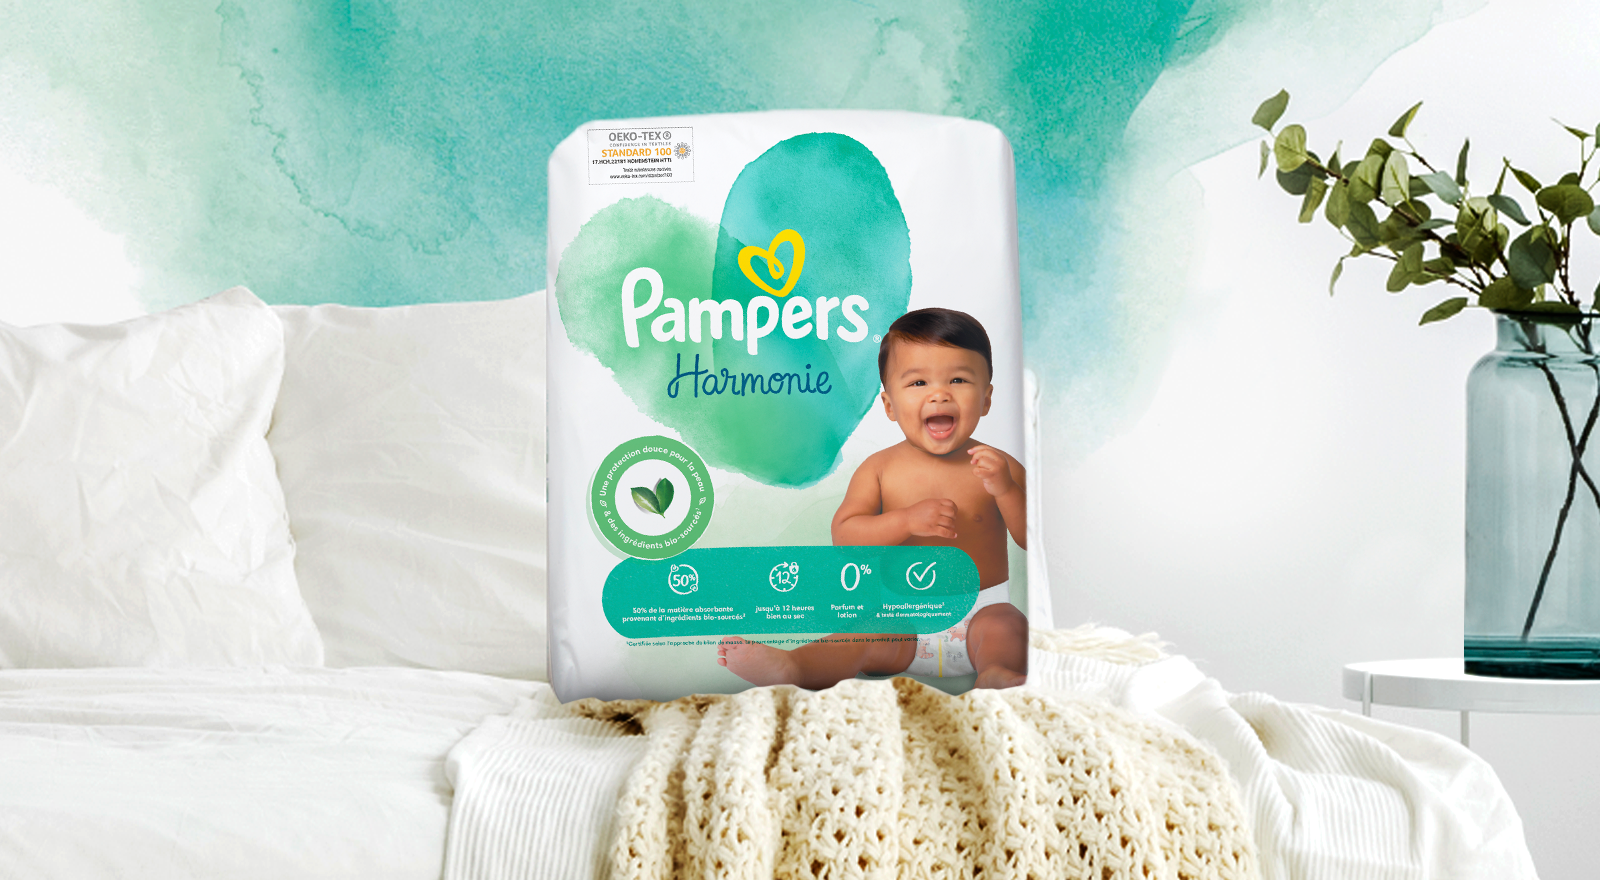 Mega Pack 104 Couches PAMPERS HARMONIE New Baby Taille 2 (4 à 8 KG